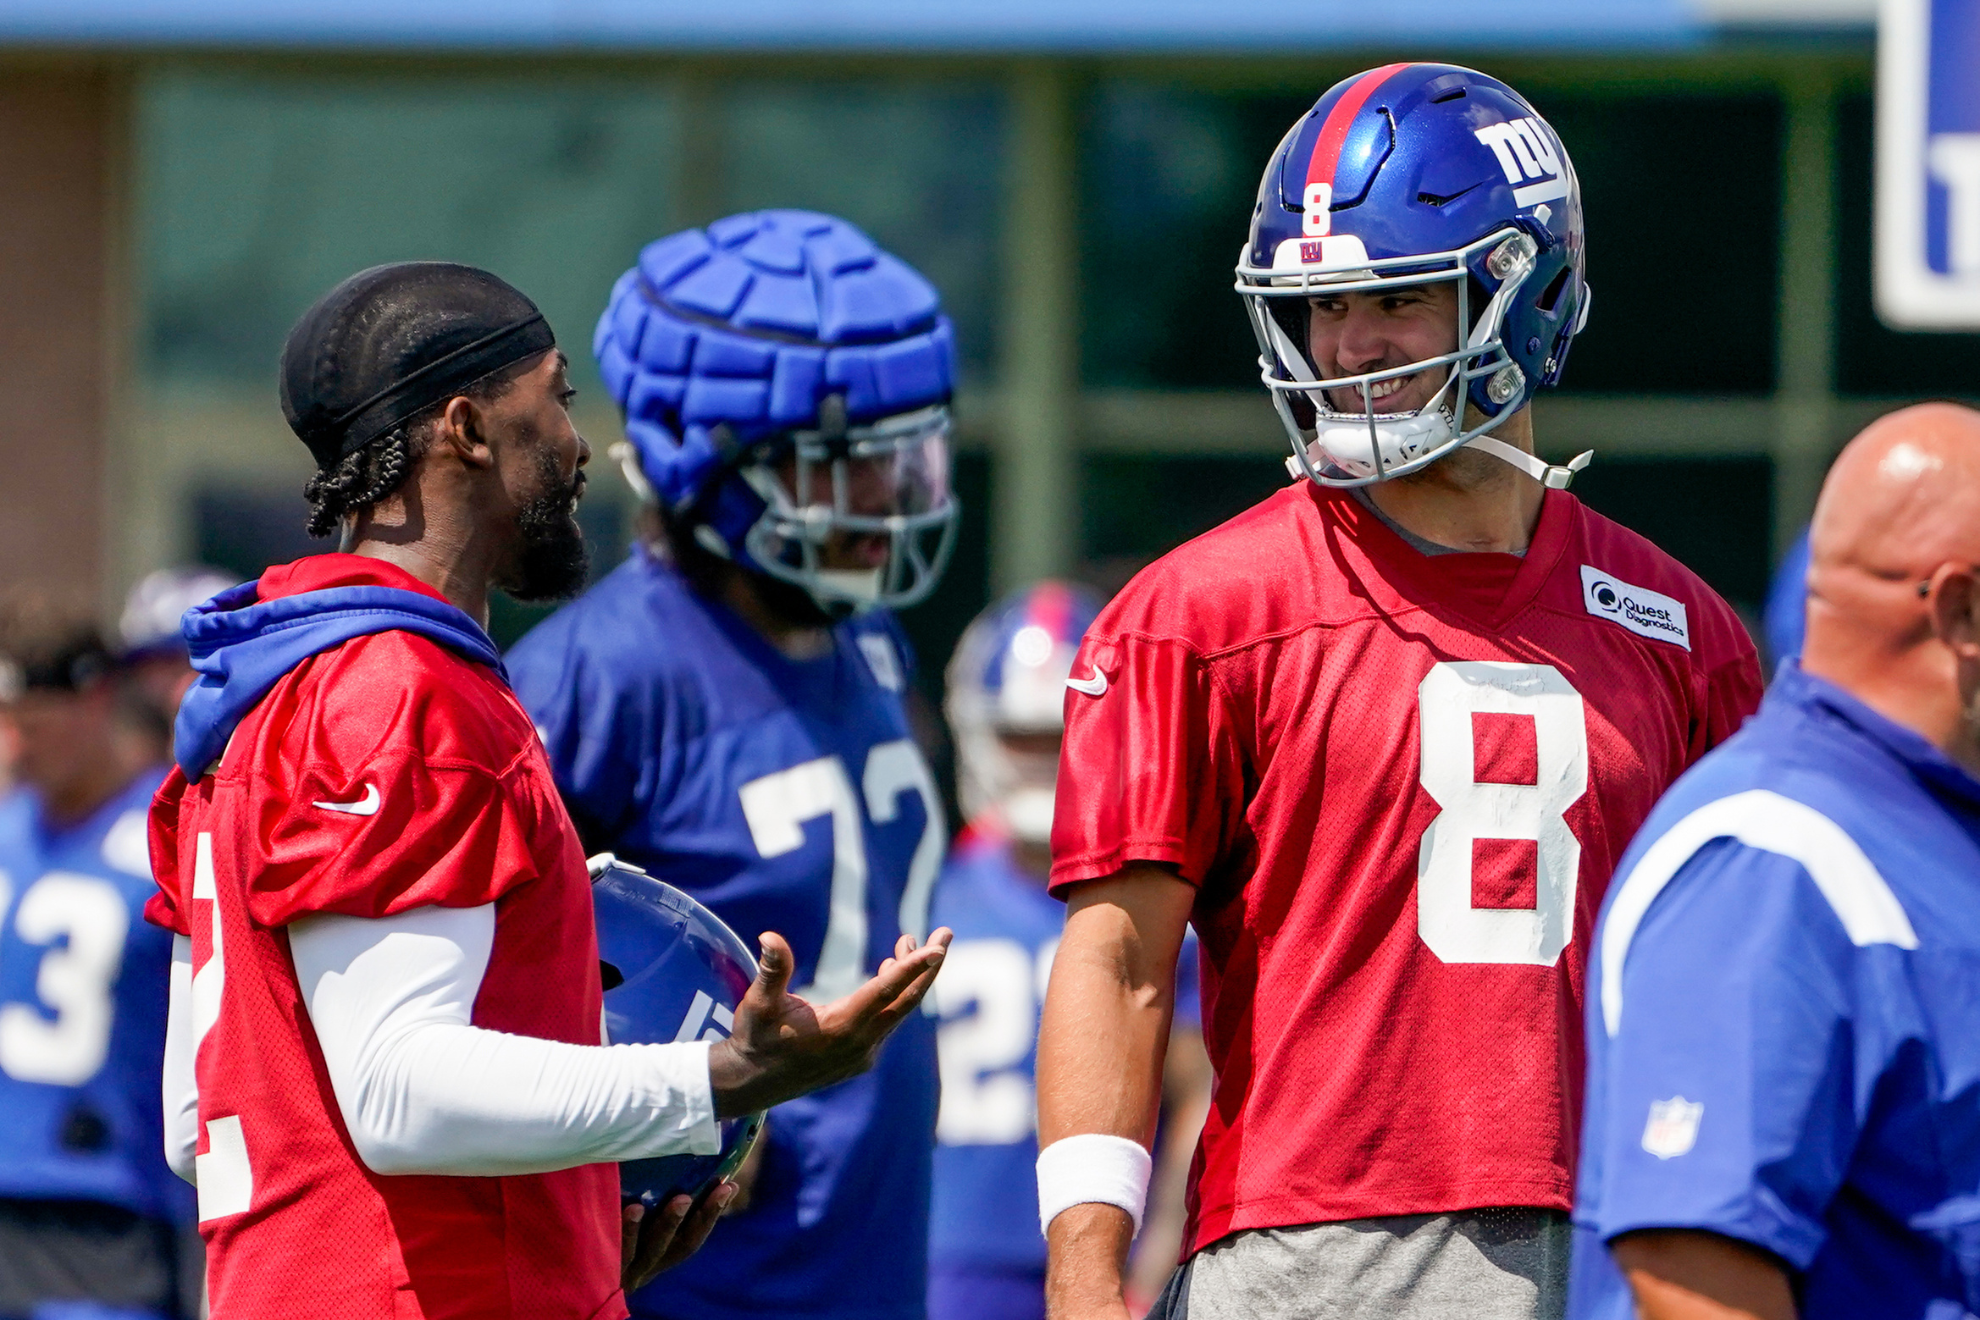 Tyrod Taylor looks likely to take over for Daniel Jones in Week 7.